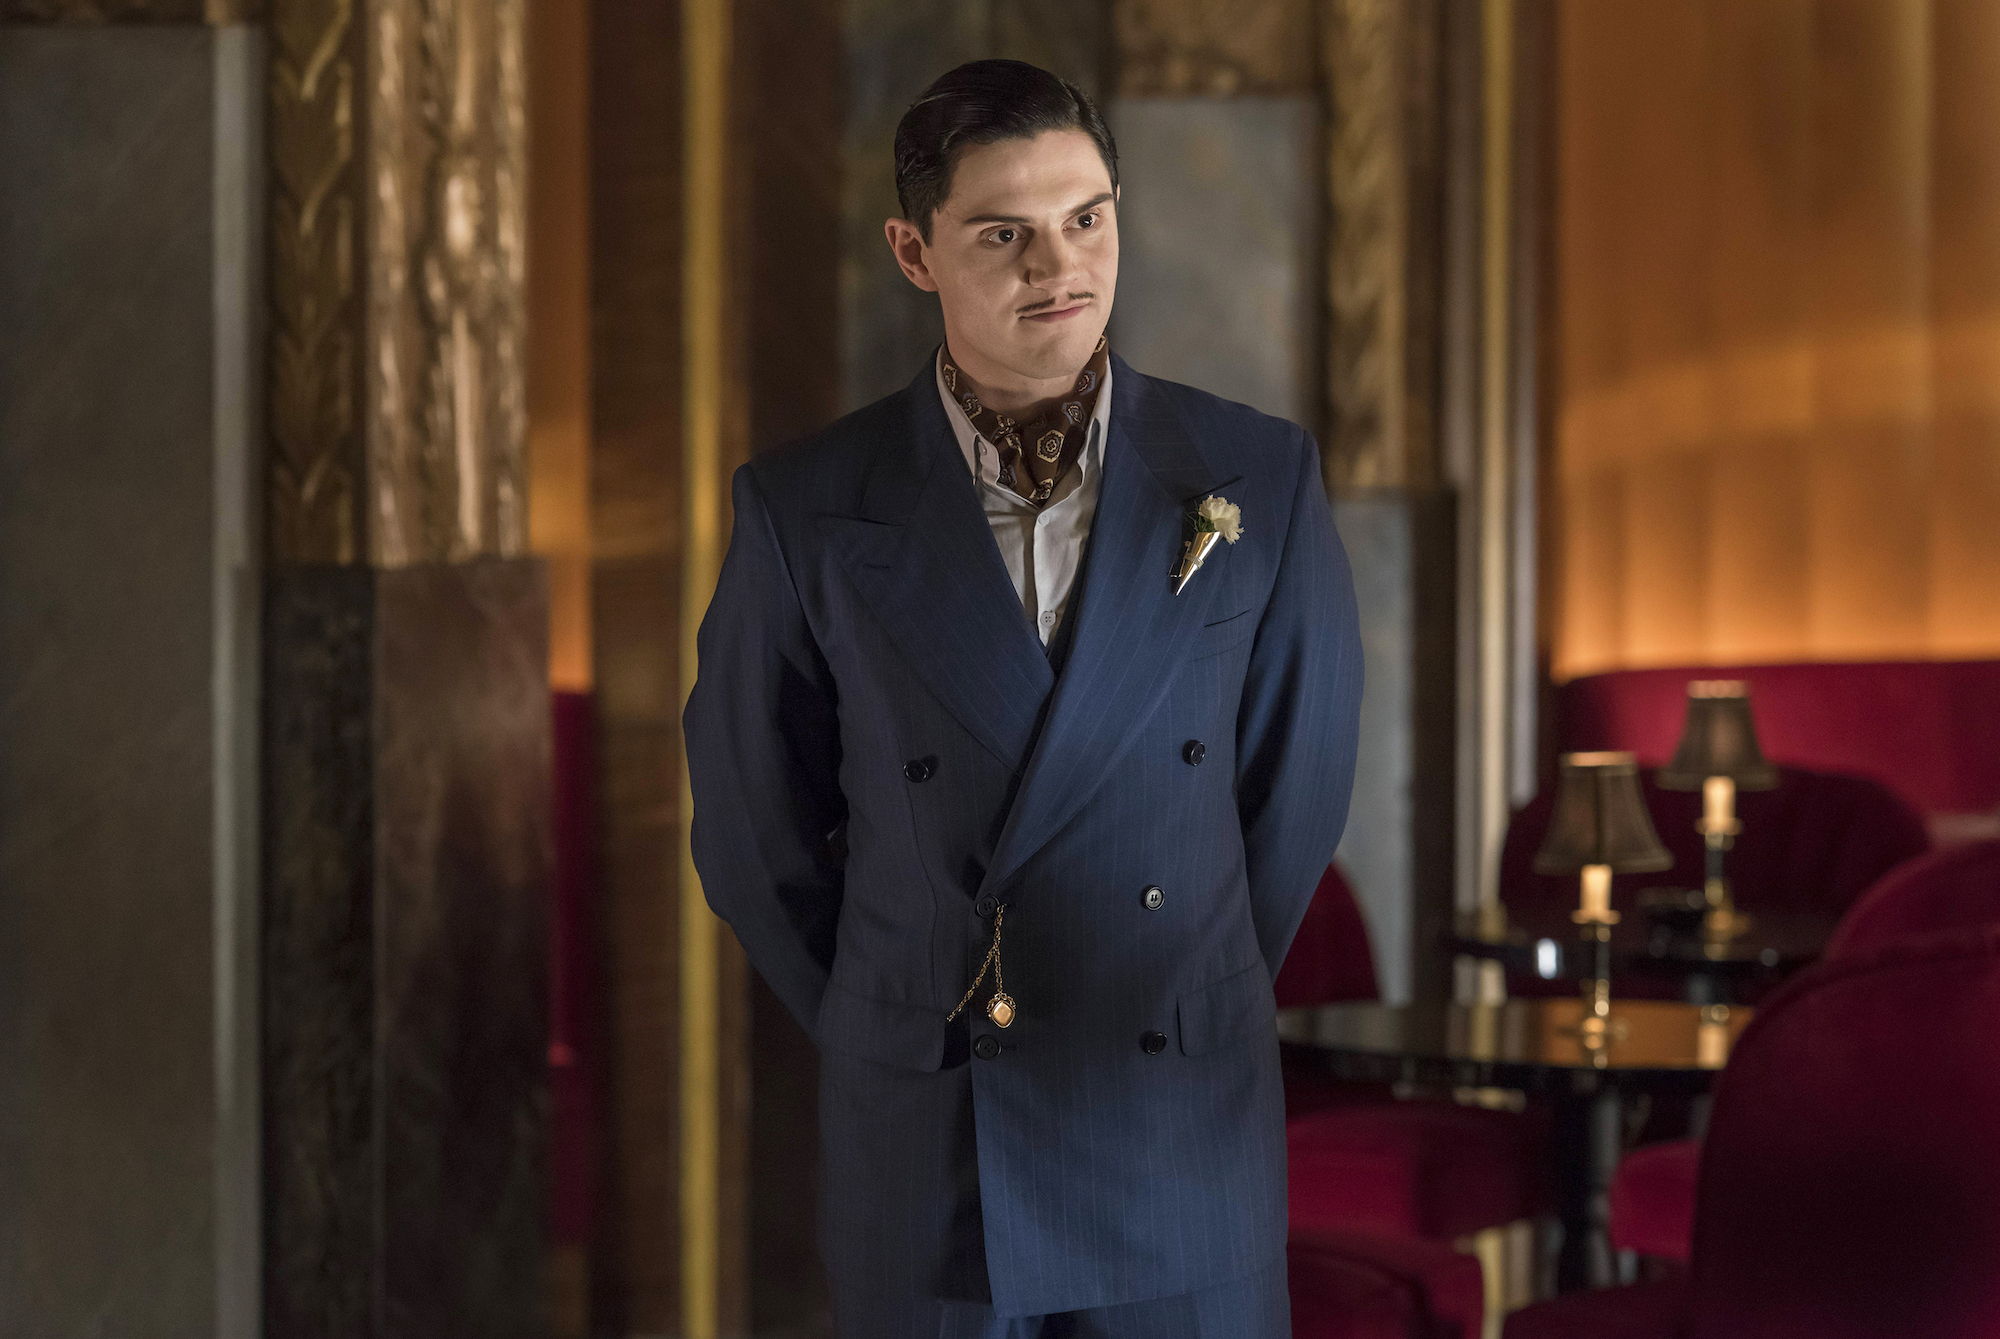 Evan Peters plays James Patrick March and he's standing in Hotel Cortez in 'American Horror Story: Hotel.'